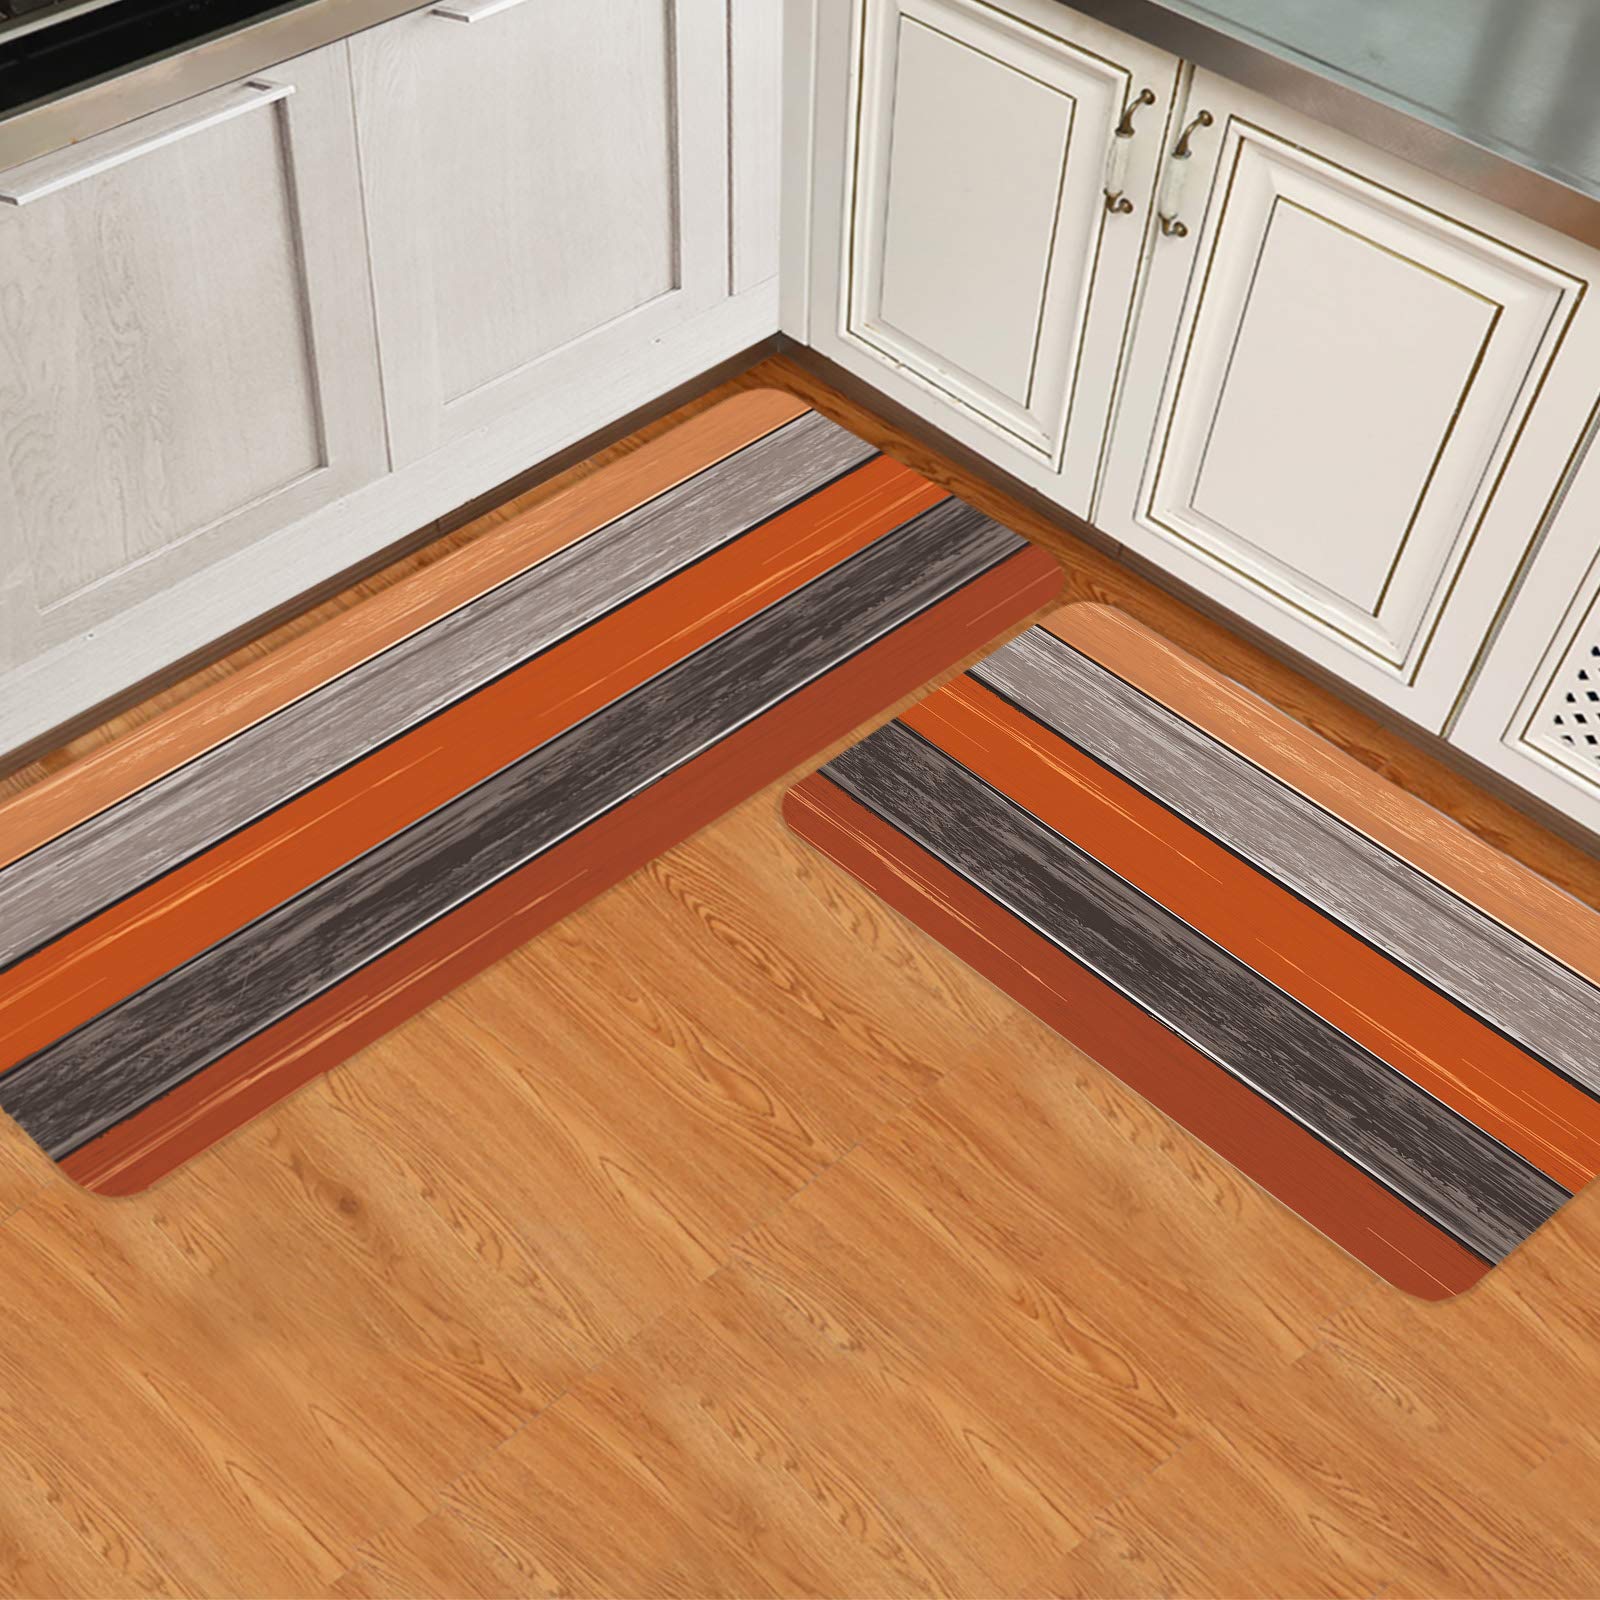 Homeown Barn Comfort Kitchen Rug Set 2 Piece, Non Slip Cushioned Floor Mat Ombre Farmhouse Absorbent Carpet for Laundry Bathroom Living Room 19.7x31.5in+19.7x63in Orange Grey Wooden Stripe